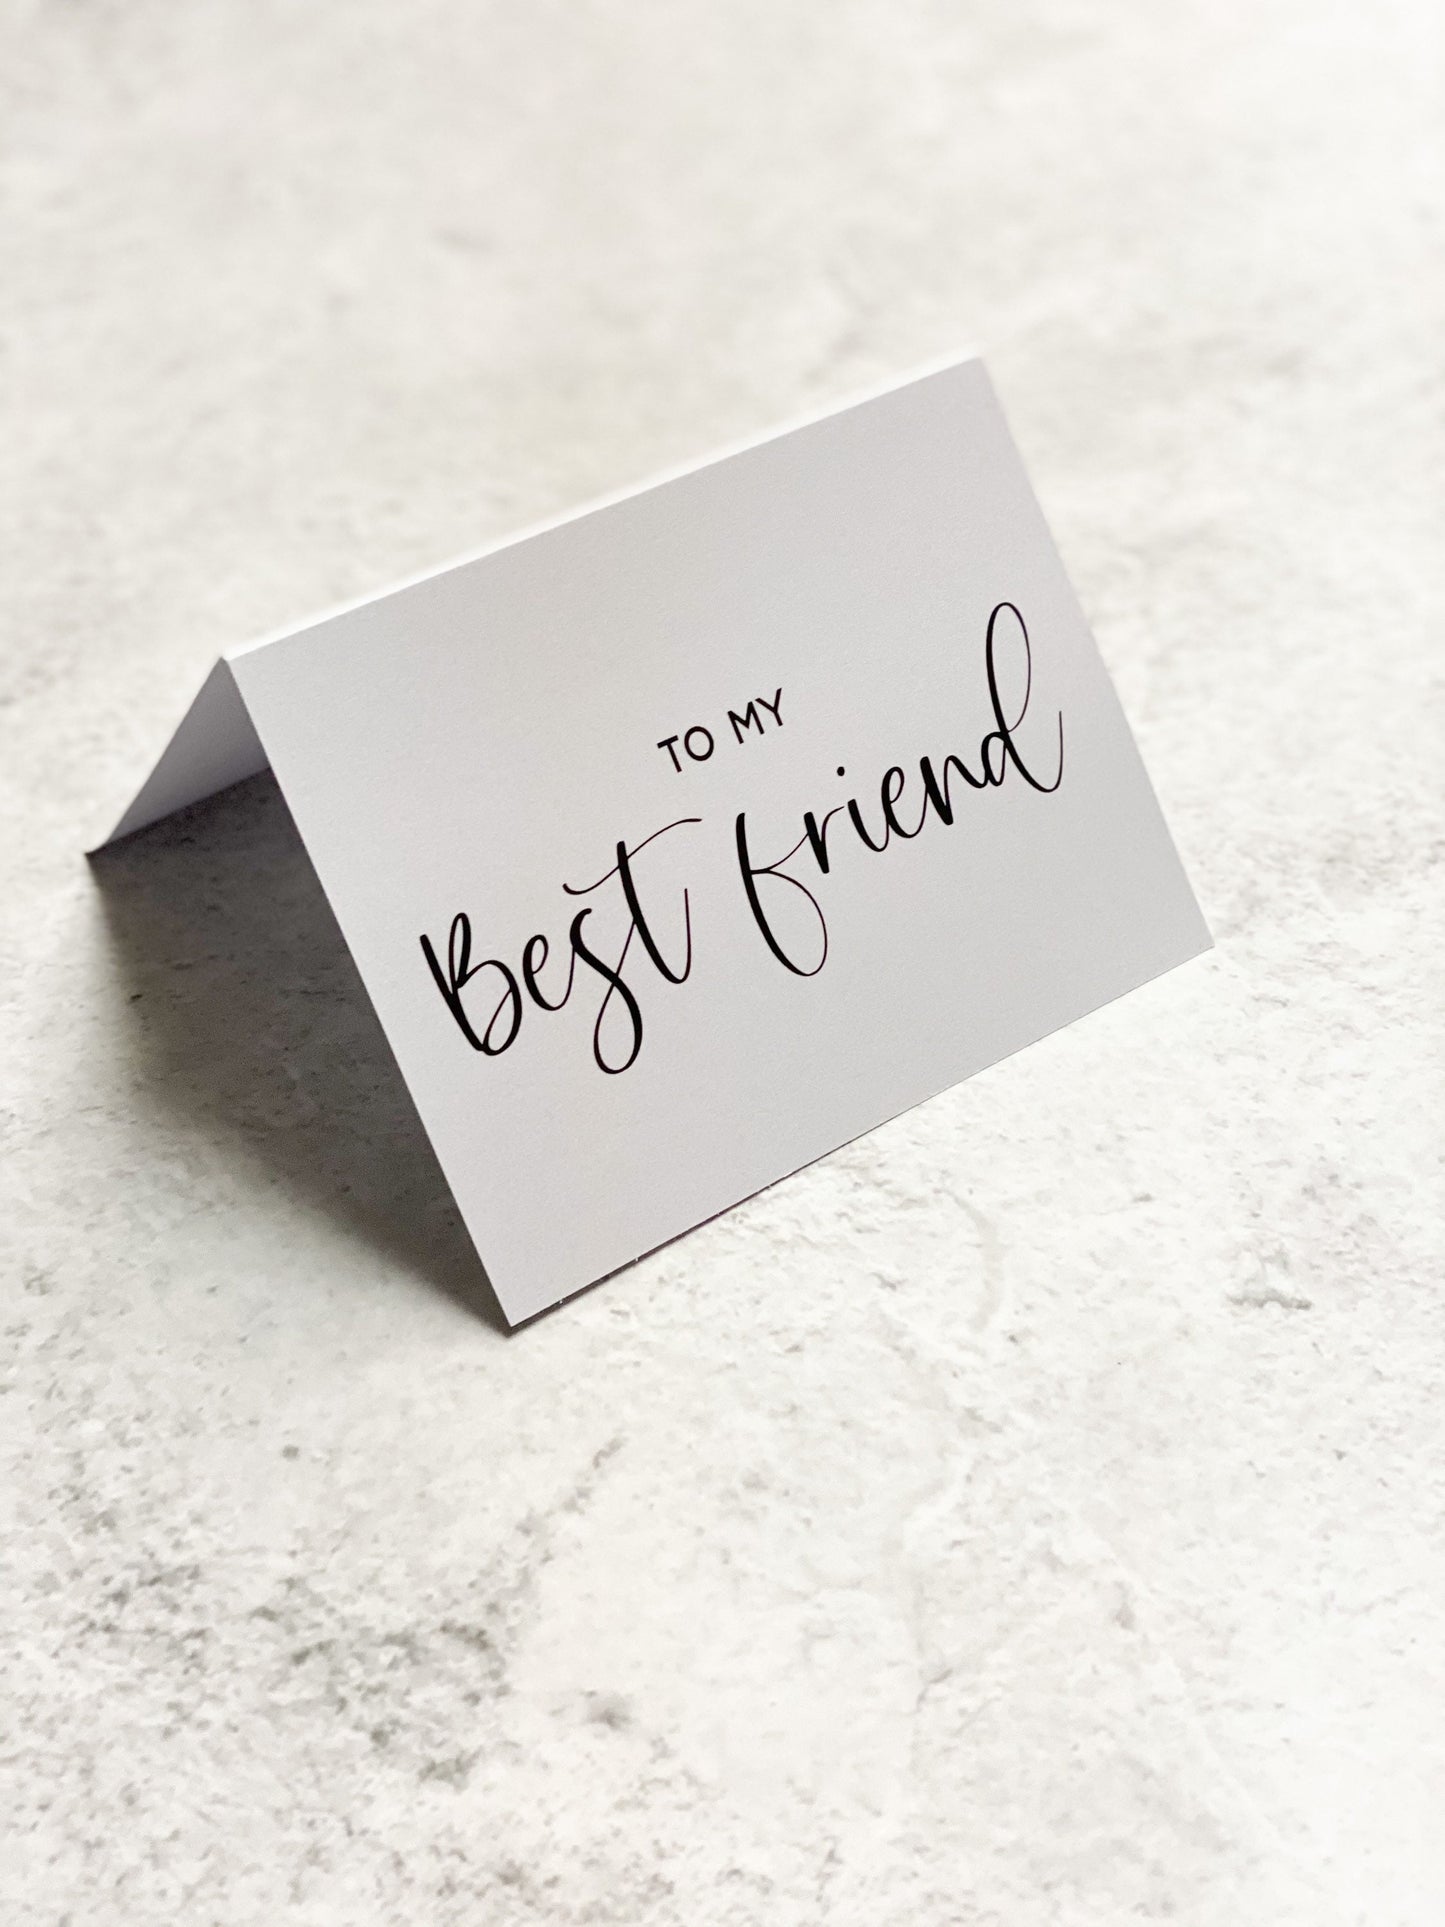 To my best friend greeting card